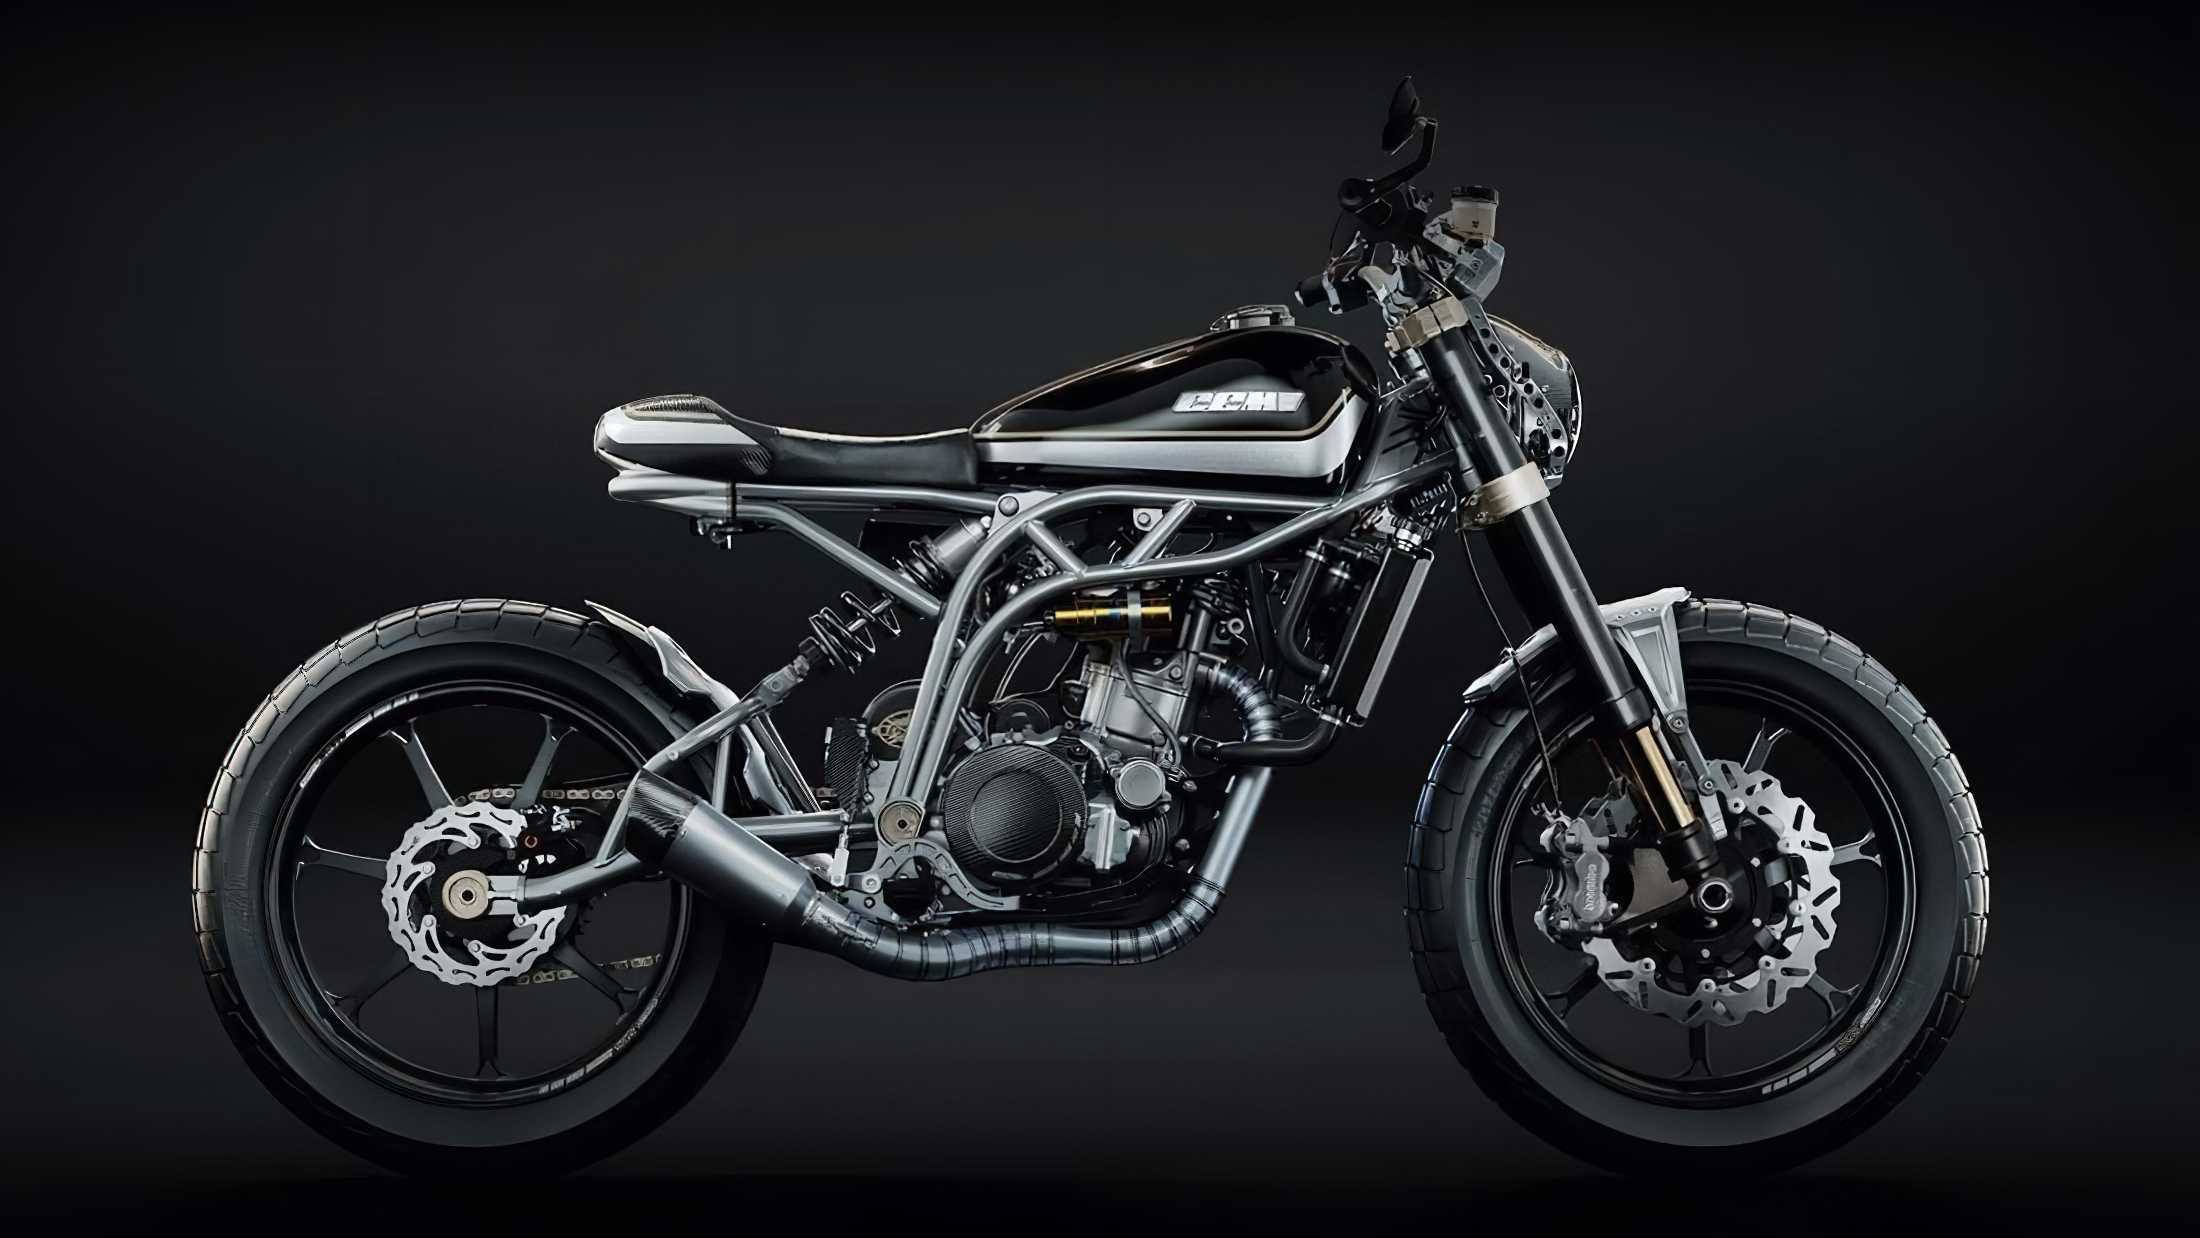 Noble special model - CCM Heritage 71 TI
- also in the MOTORCYCLES.NEWS APP